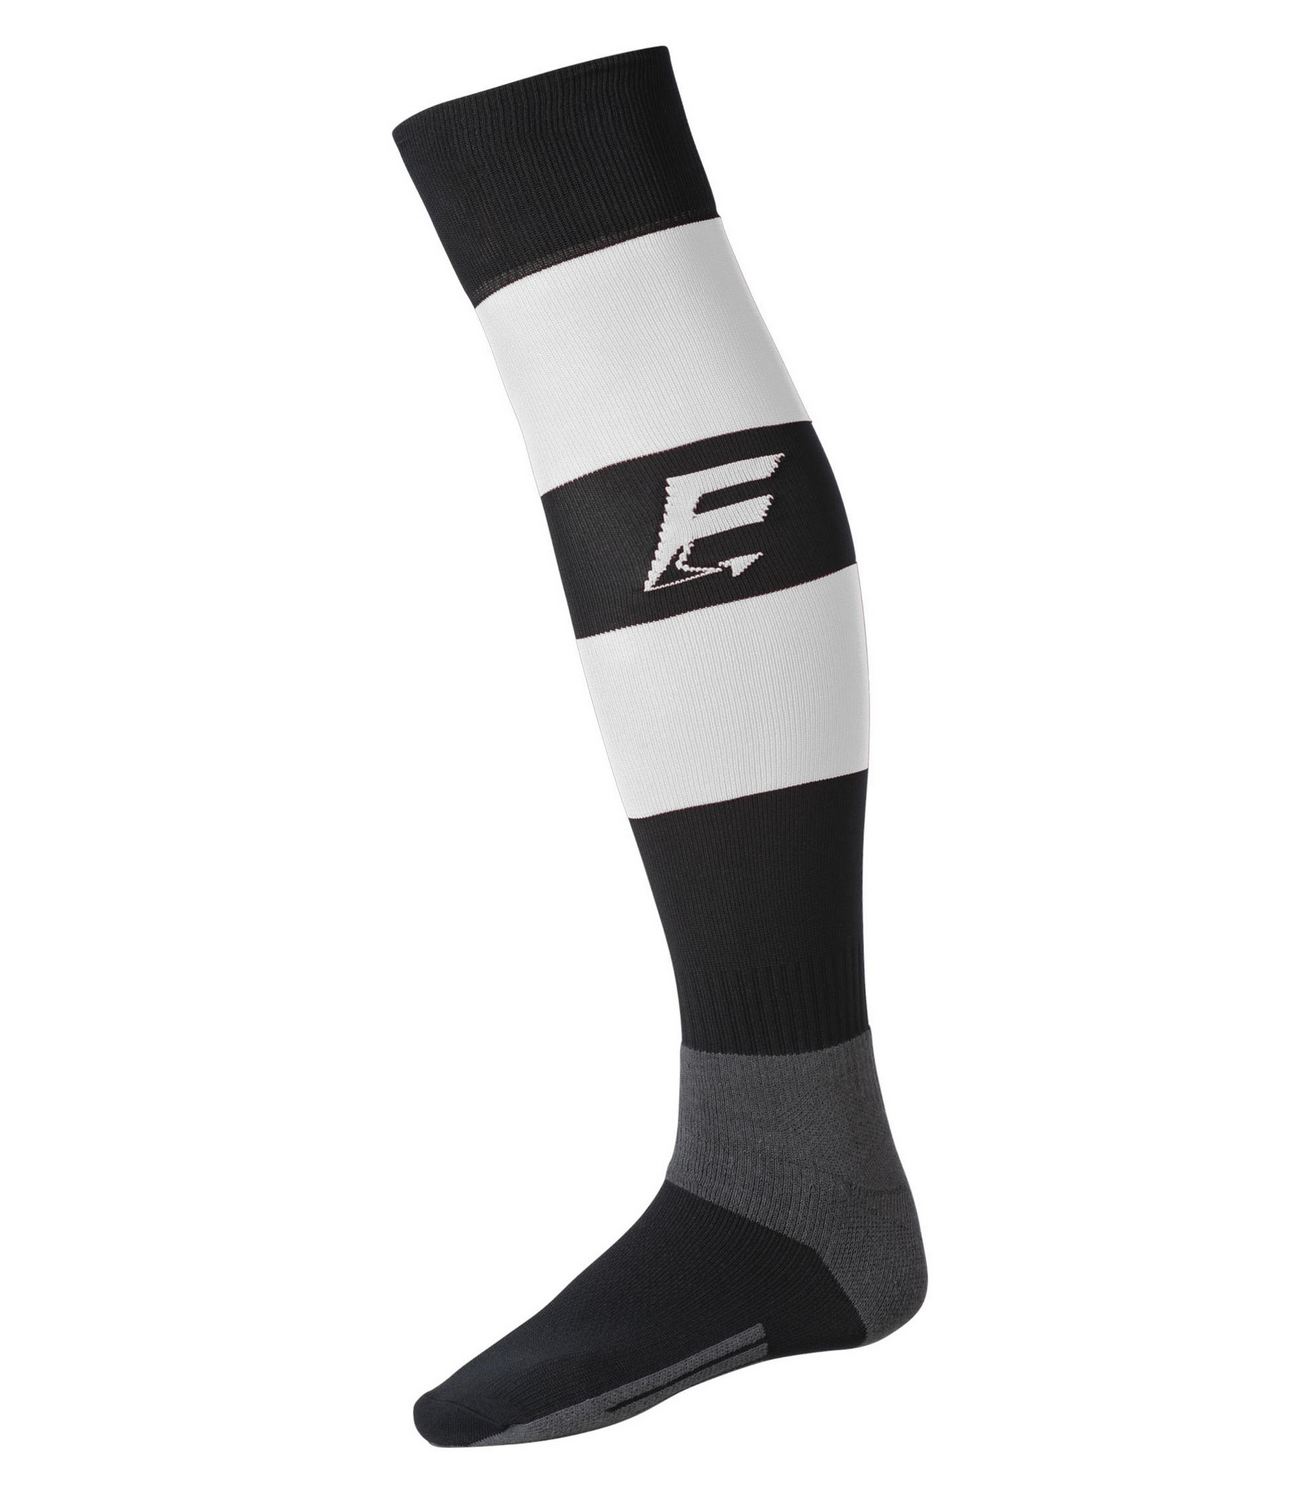 Chaussettes de rugby Force XV RAYEES noir-blanc